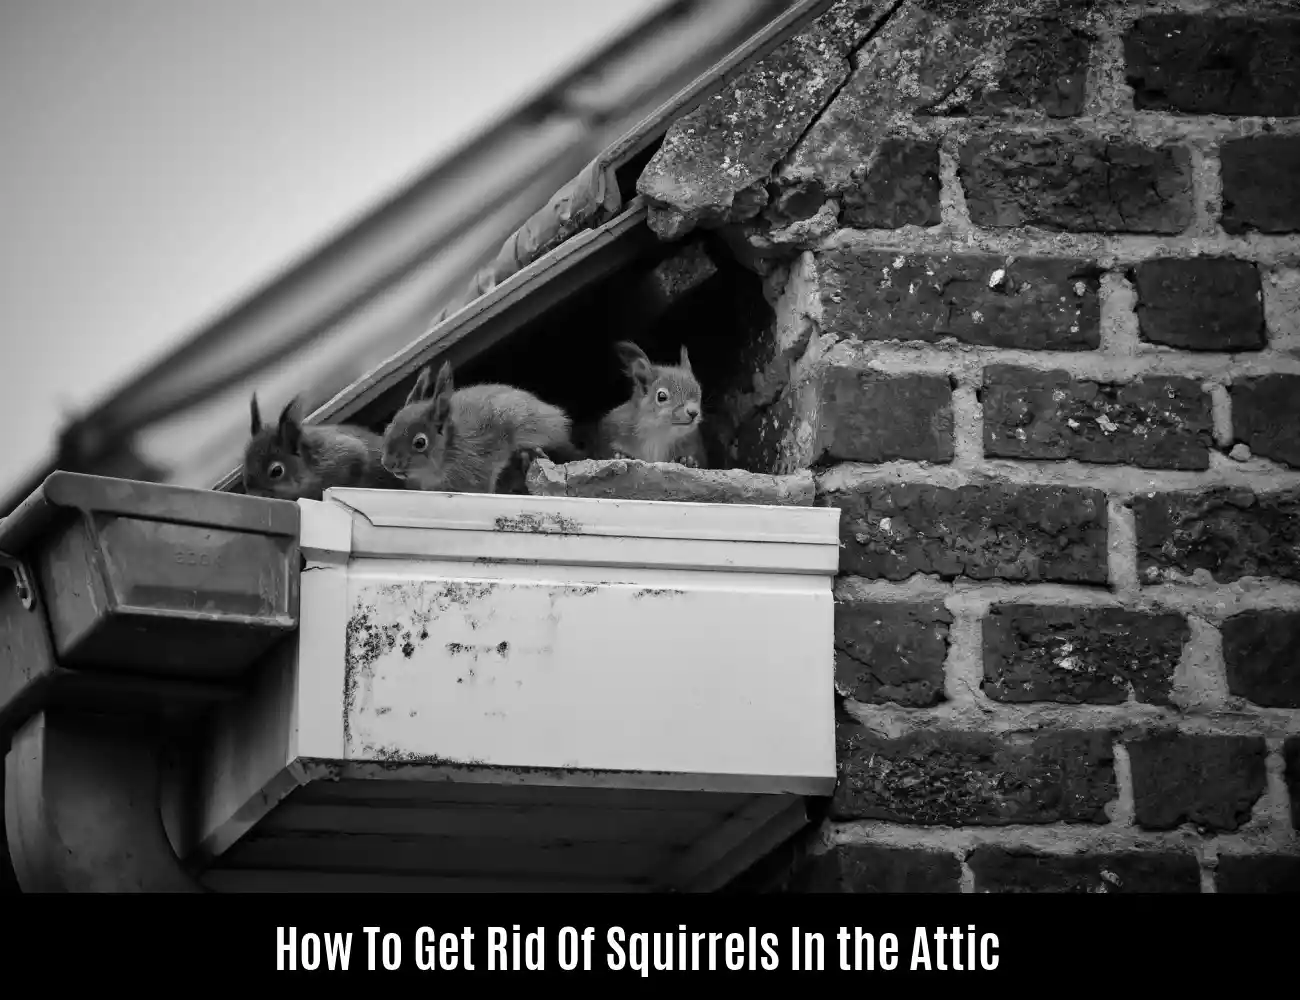 How To Get Rid Of Squirrels In the Attic